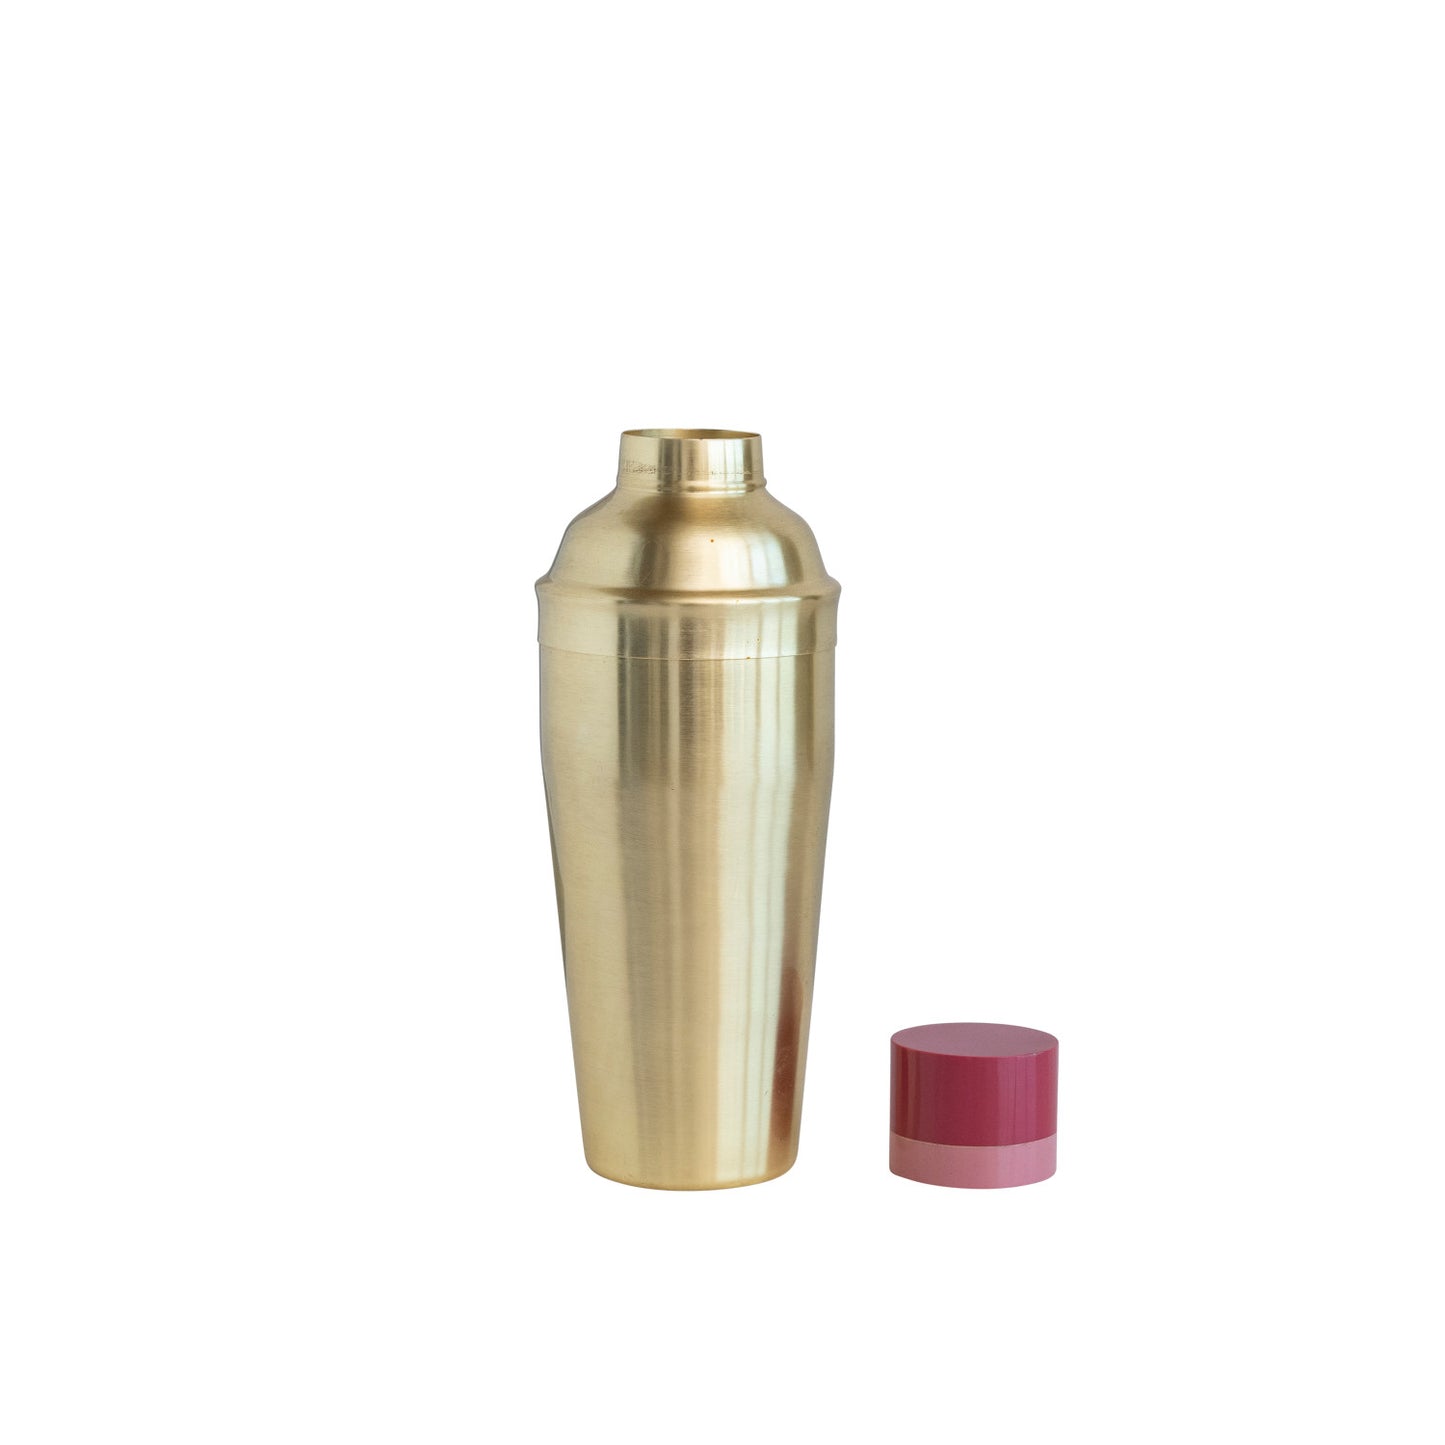 Cocktail Shaker w/ Resin Top, Brass Finish and Pink